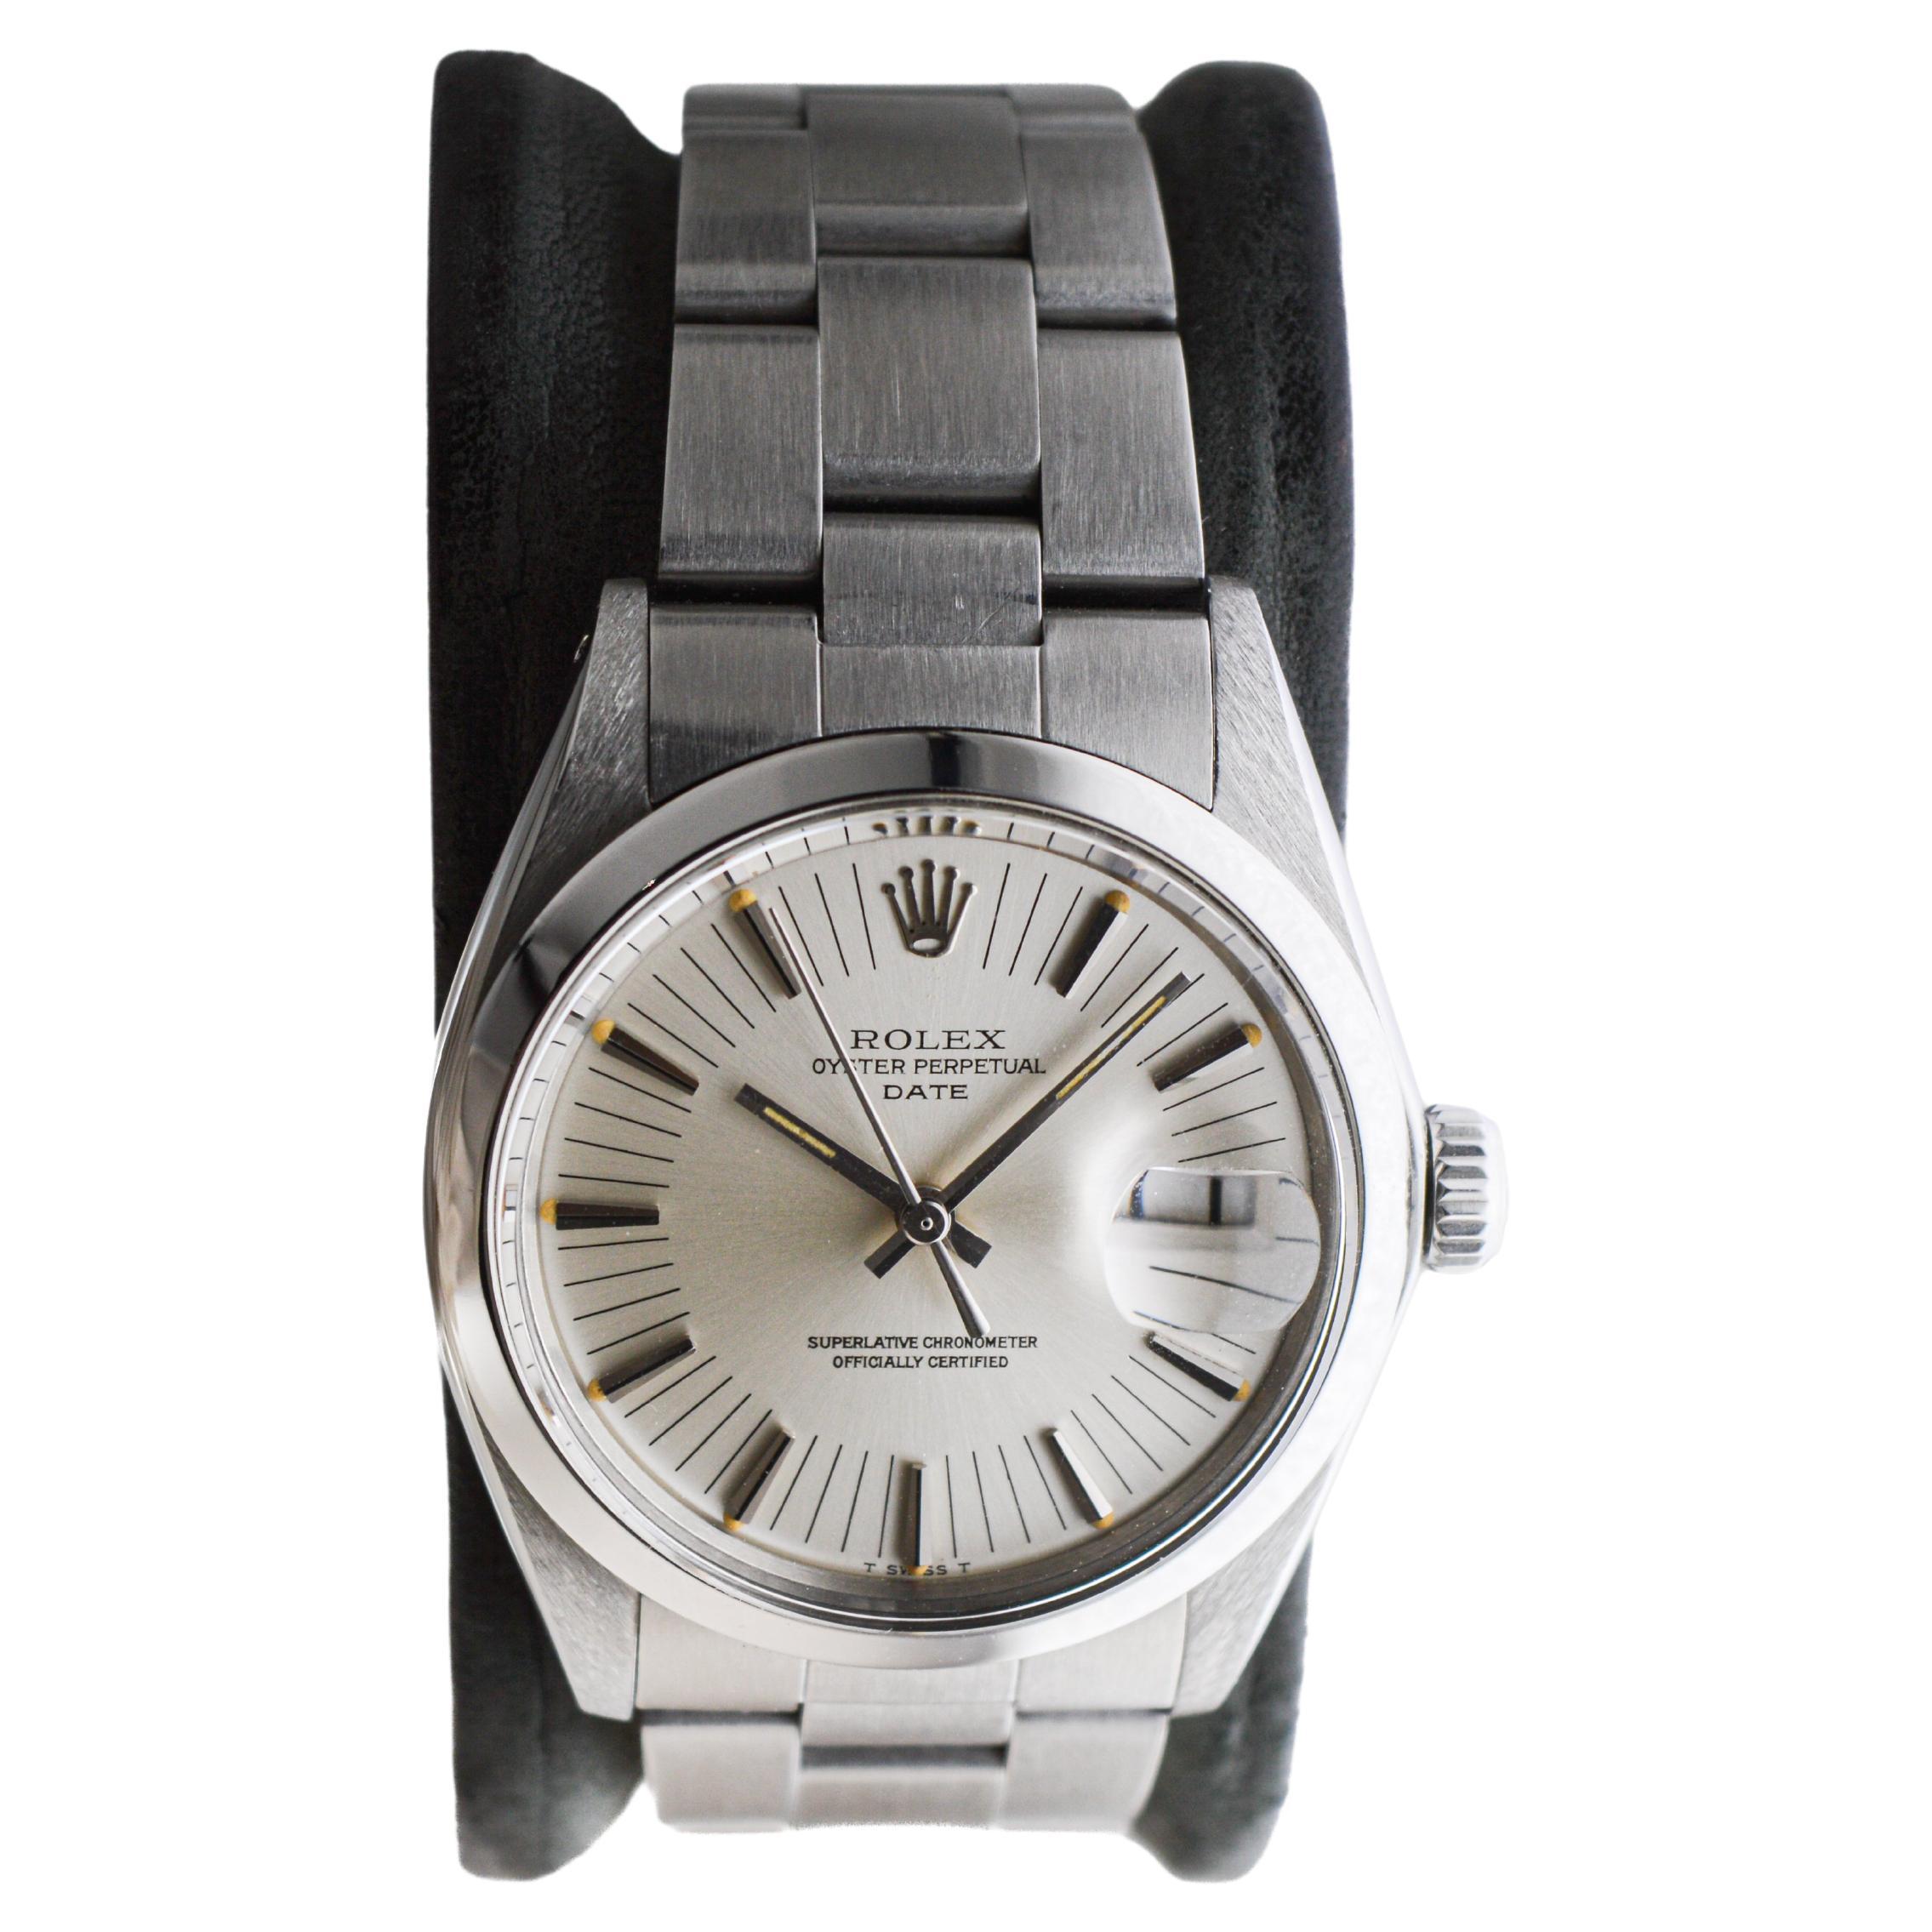 Modern Rolex Steel Oyster Perpetual Date with Original Bracelet From 1973 Rare Dial For Sale